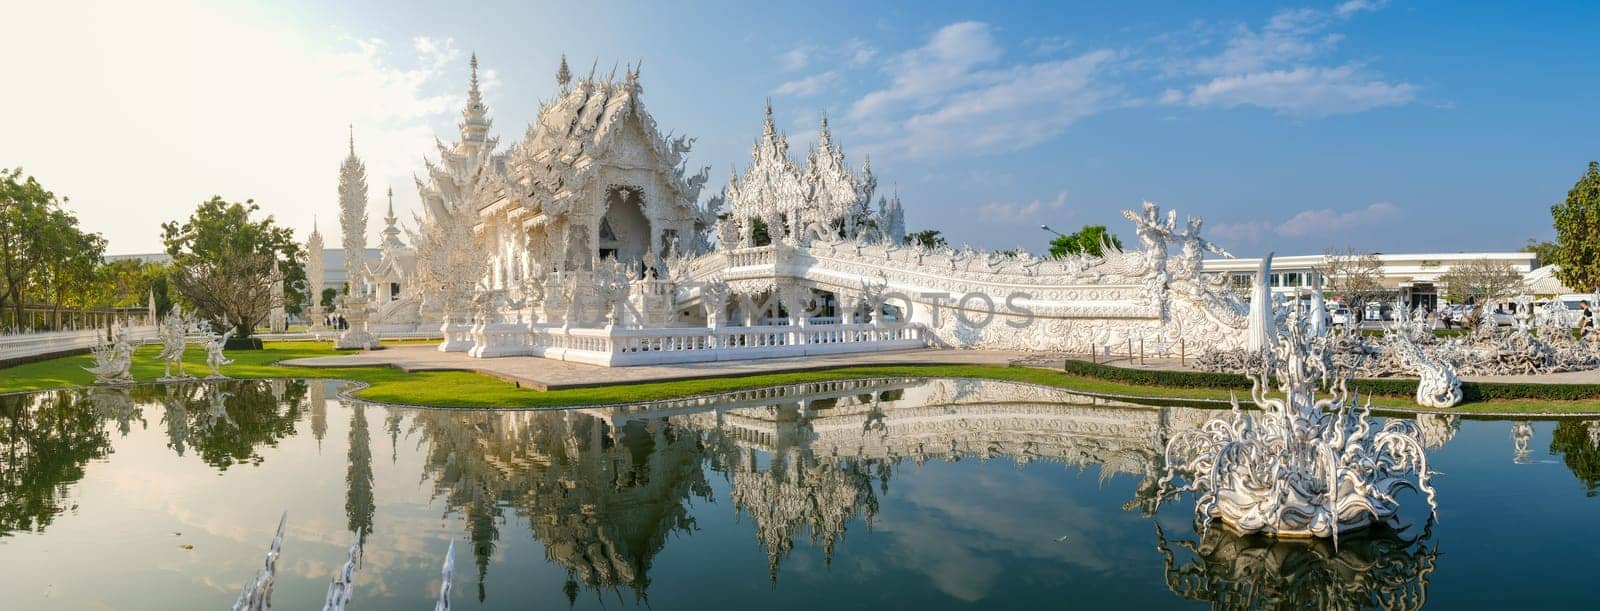 White Temple Chiang Rai Thailand, Wat Rong Khun at sunset in the evening Northern Thailand.